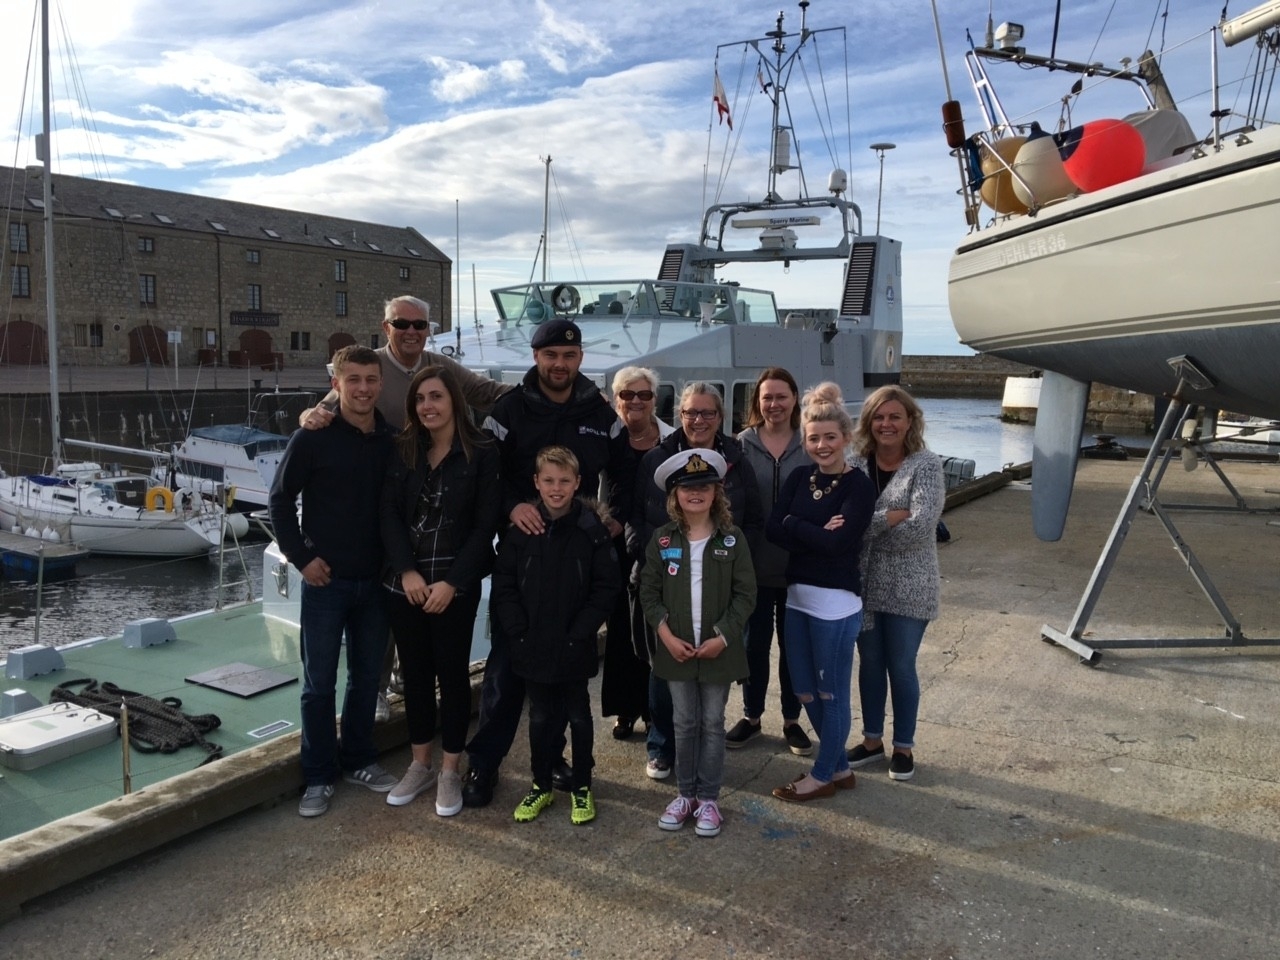 Jamie Bellingham with his family at Lossiemouth Marina